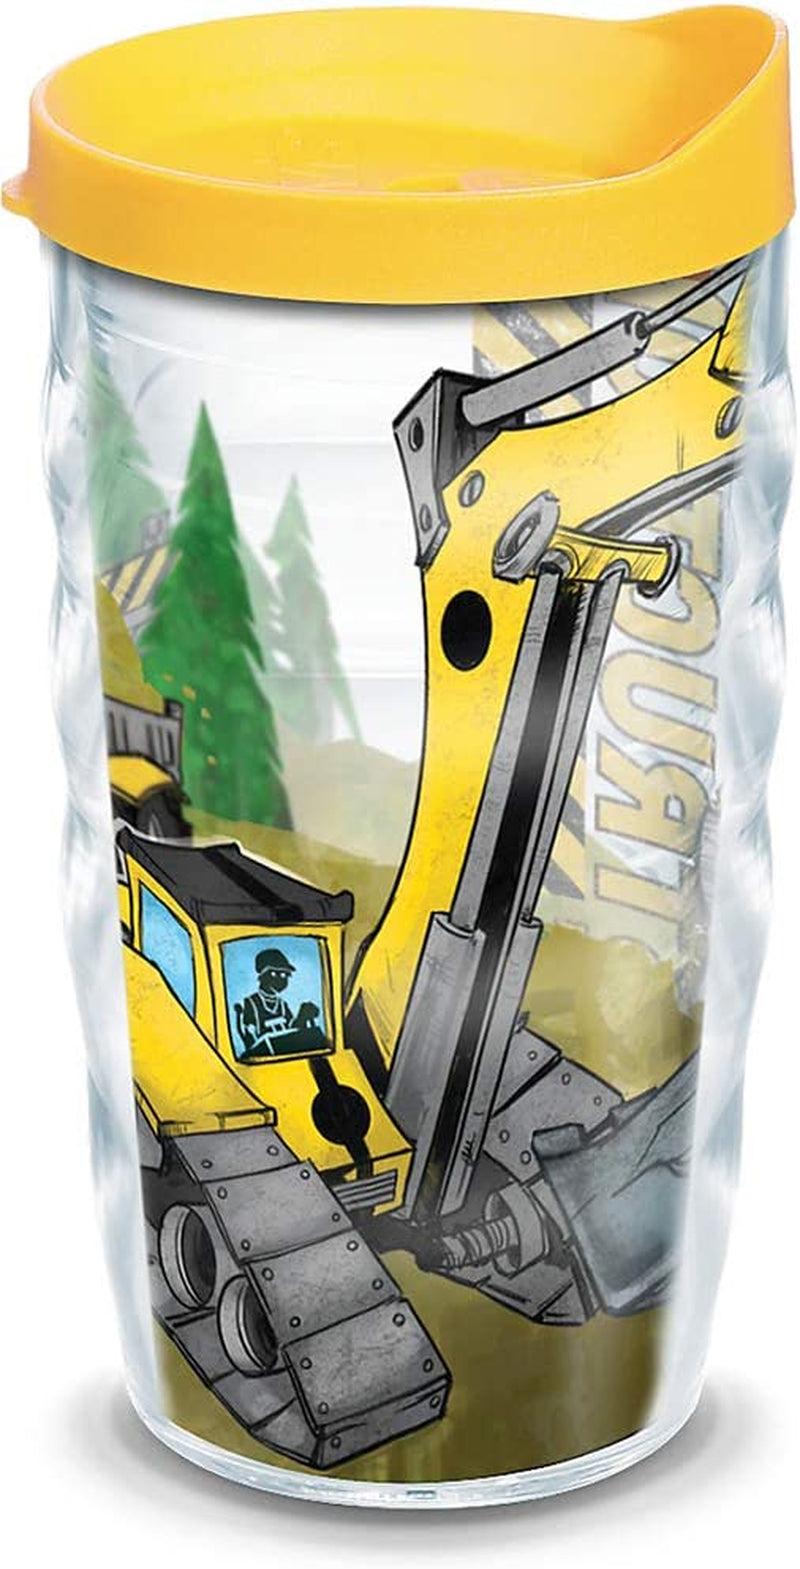 Tervis Construction Trucks Insulated Tumbler with Wrap and Yellow Lid, 10Oz Wavy, Clear